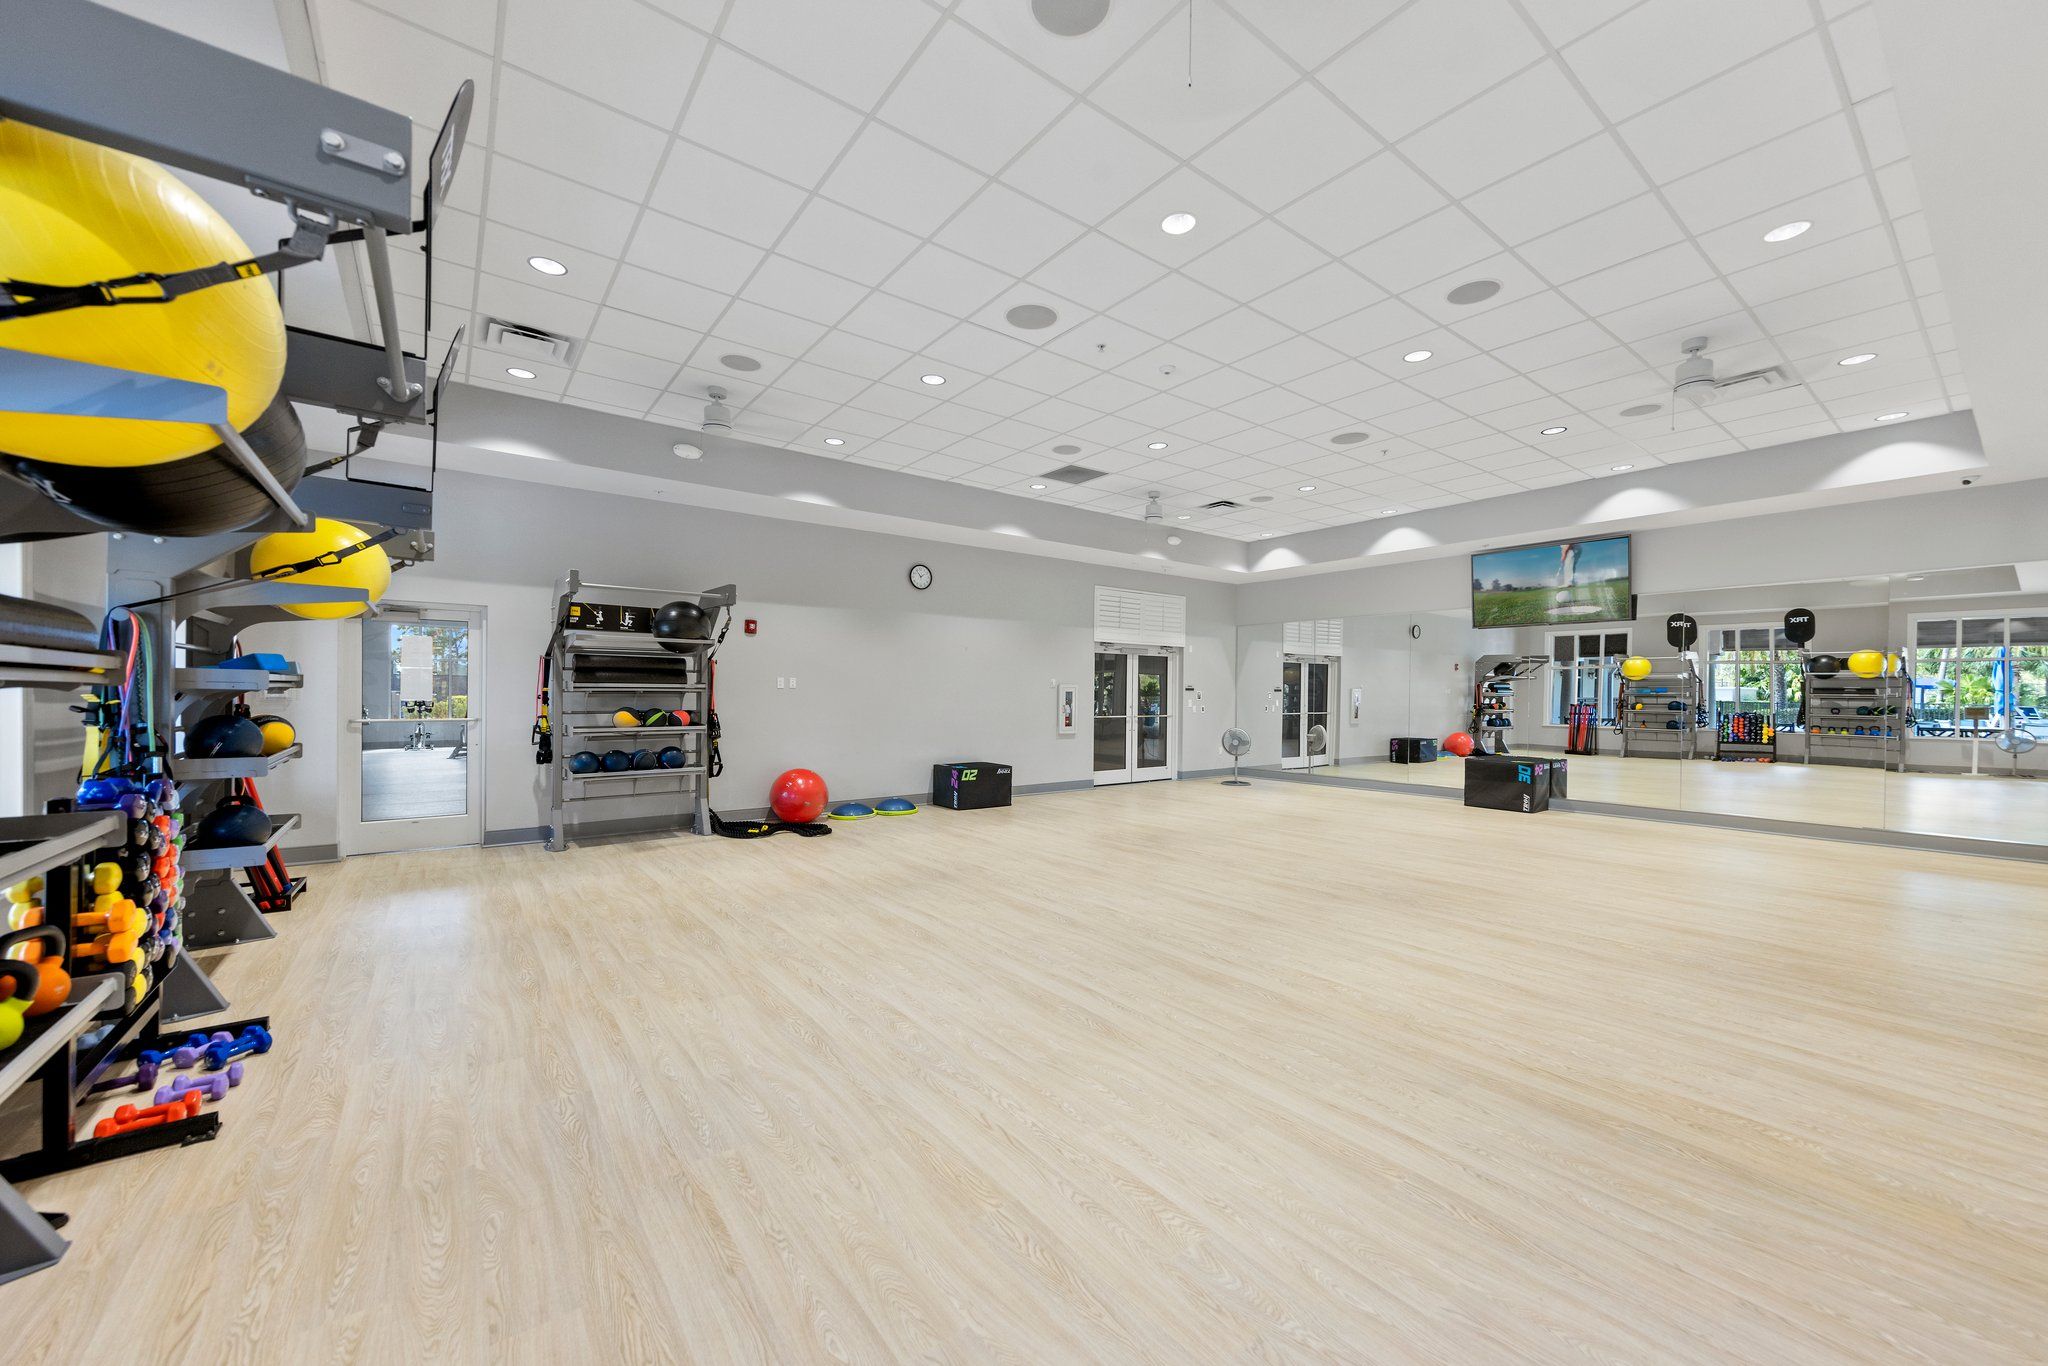 Workout Room & Classses